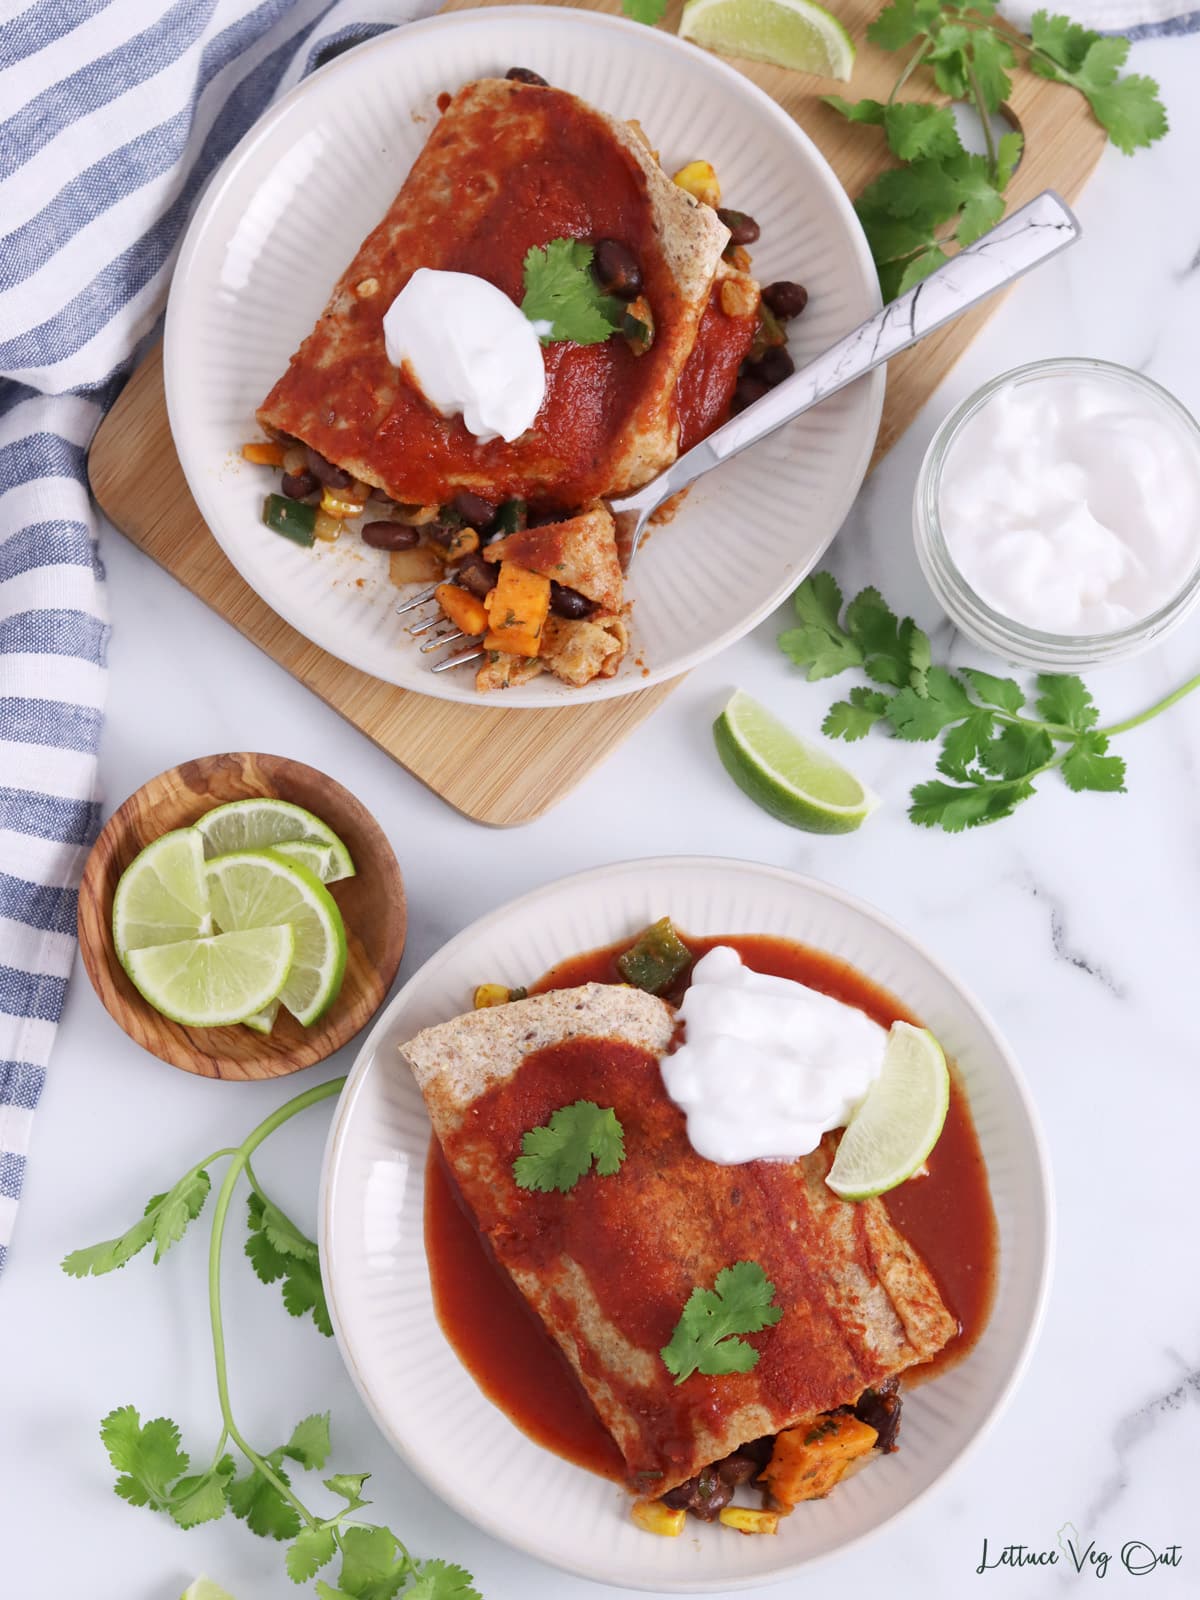 Two plates of black bean sweet potato enchiladas with red sauce, topped with sour cream and lime garnish.